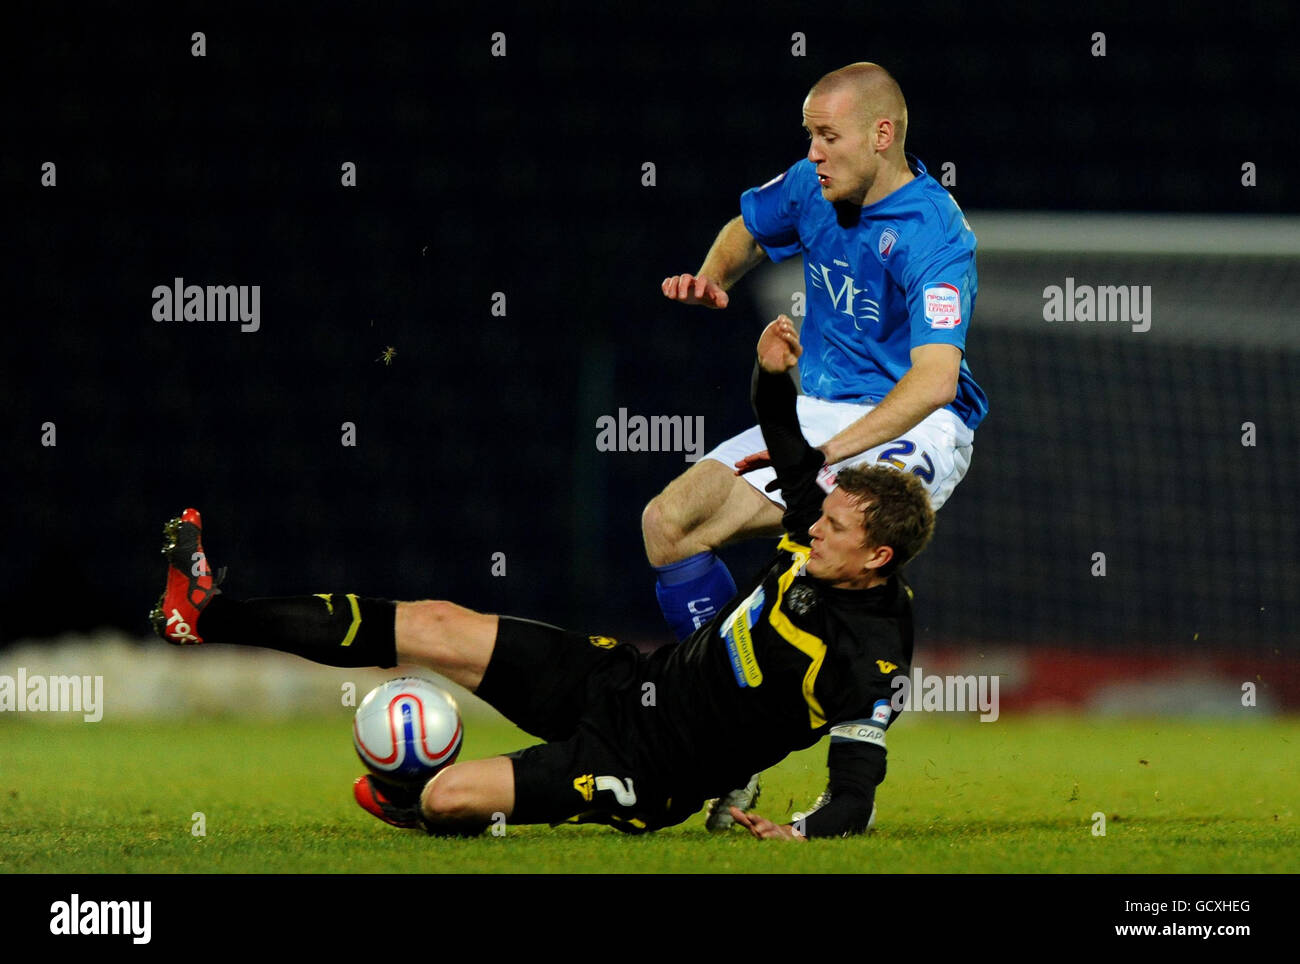 Chesterfield's Deane Smalley and Torquay's Lee Mansell battle for the ball during the npower Football League Two at the B2net Stadium, Chesterfield. Stock Photo